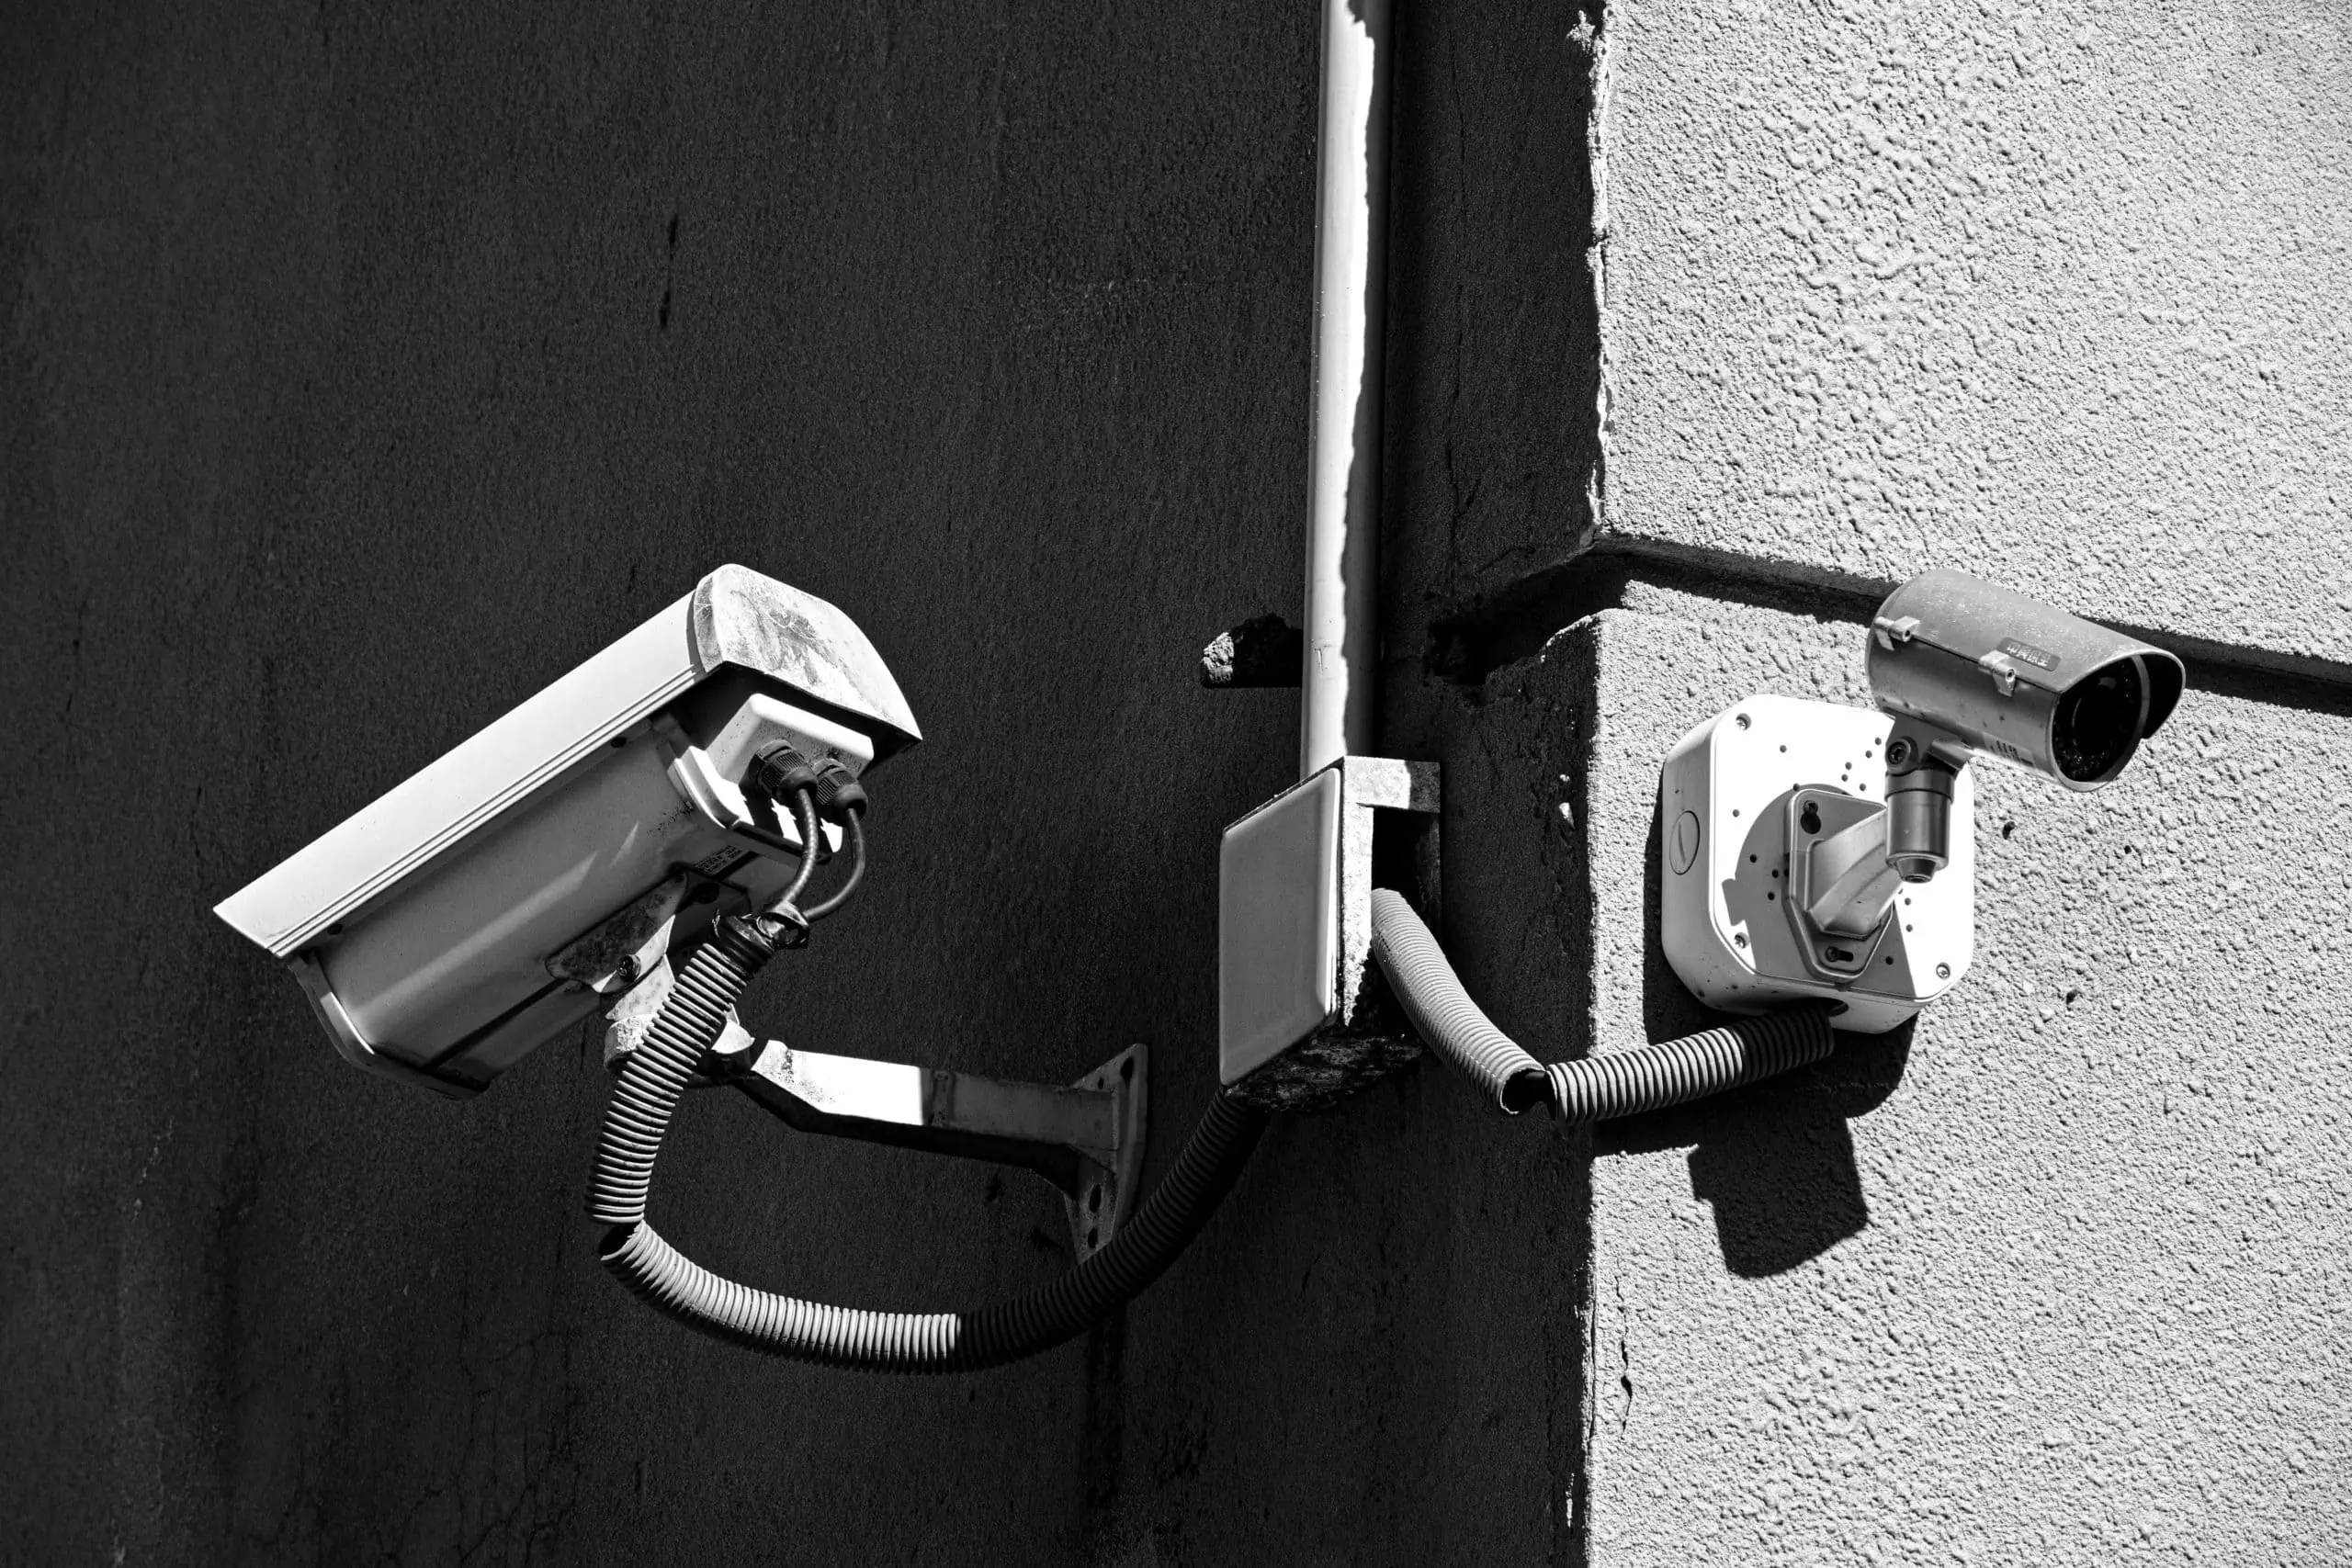 NVR Cameras placed on corner of building meaning